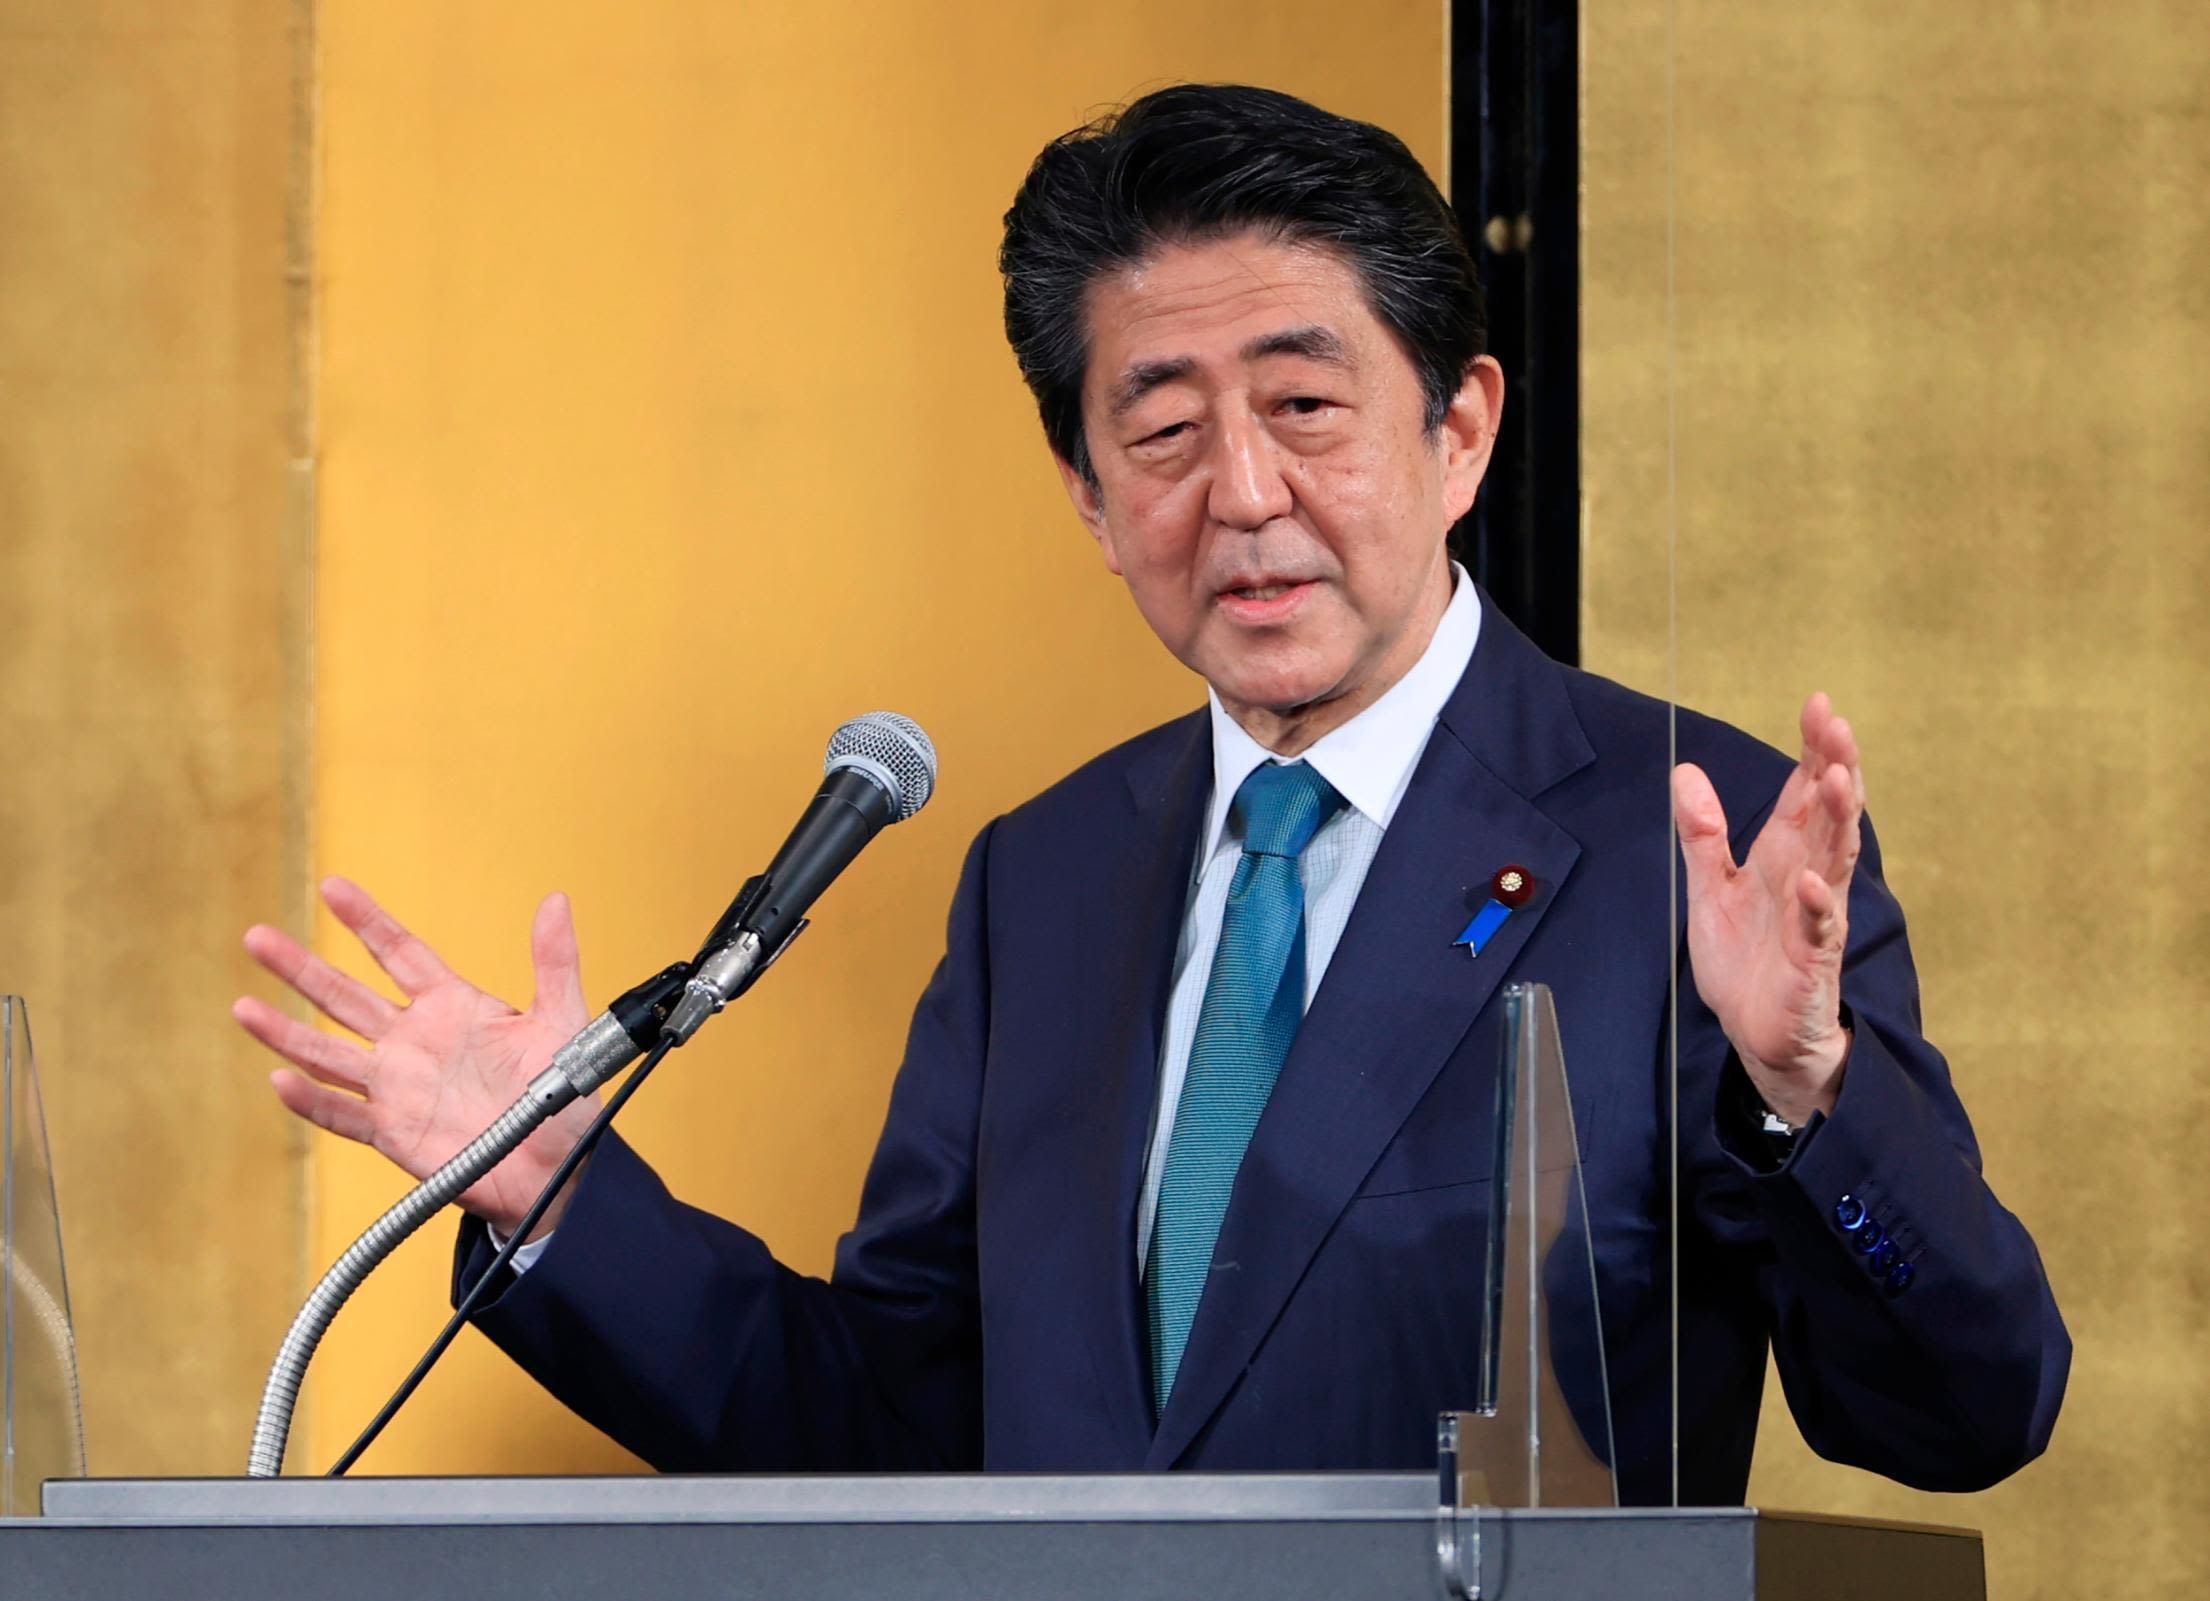 9-mind-blowing-facts-about-shinzo-abe